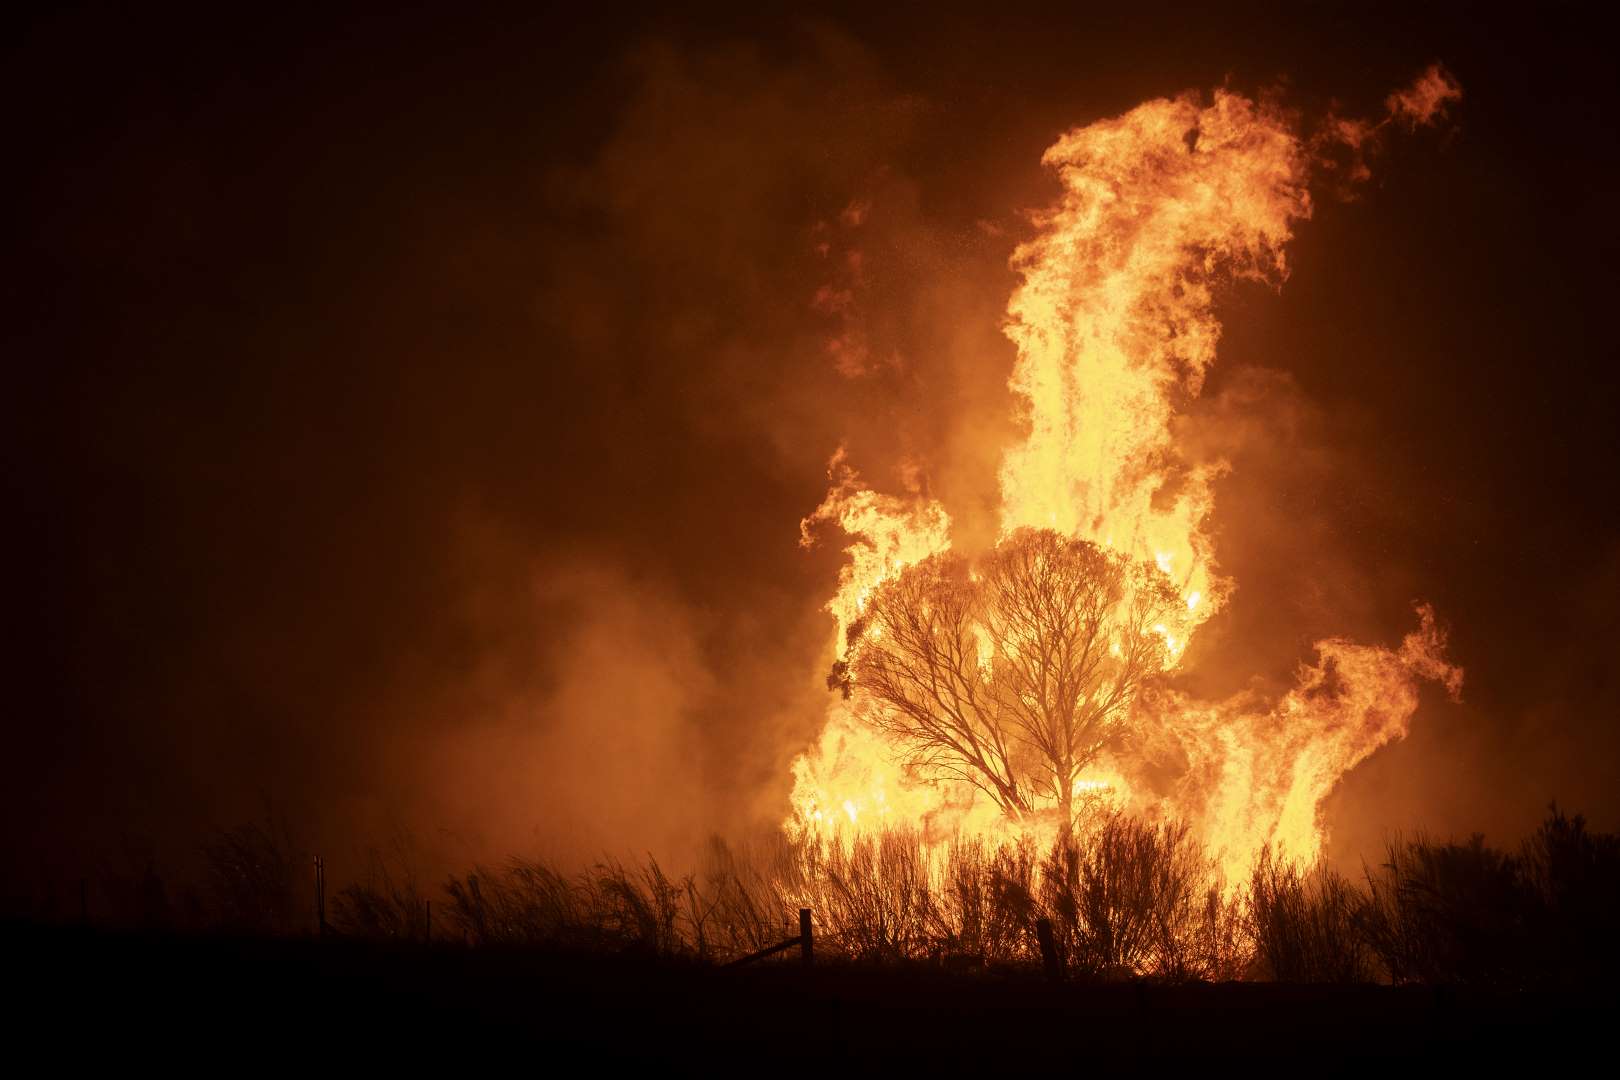 The Clear Range Fire burns in Bredbo North, New South Wales, Australia shortly before overrunning the property of Lawrence and Clair Cowie on 1 February 2020. Photo: Brook Mitchell / Getty Images